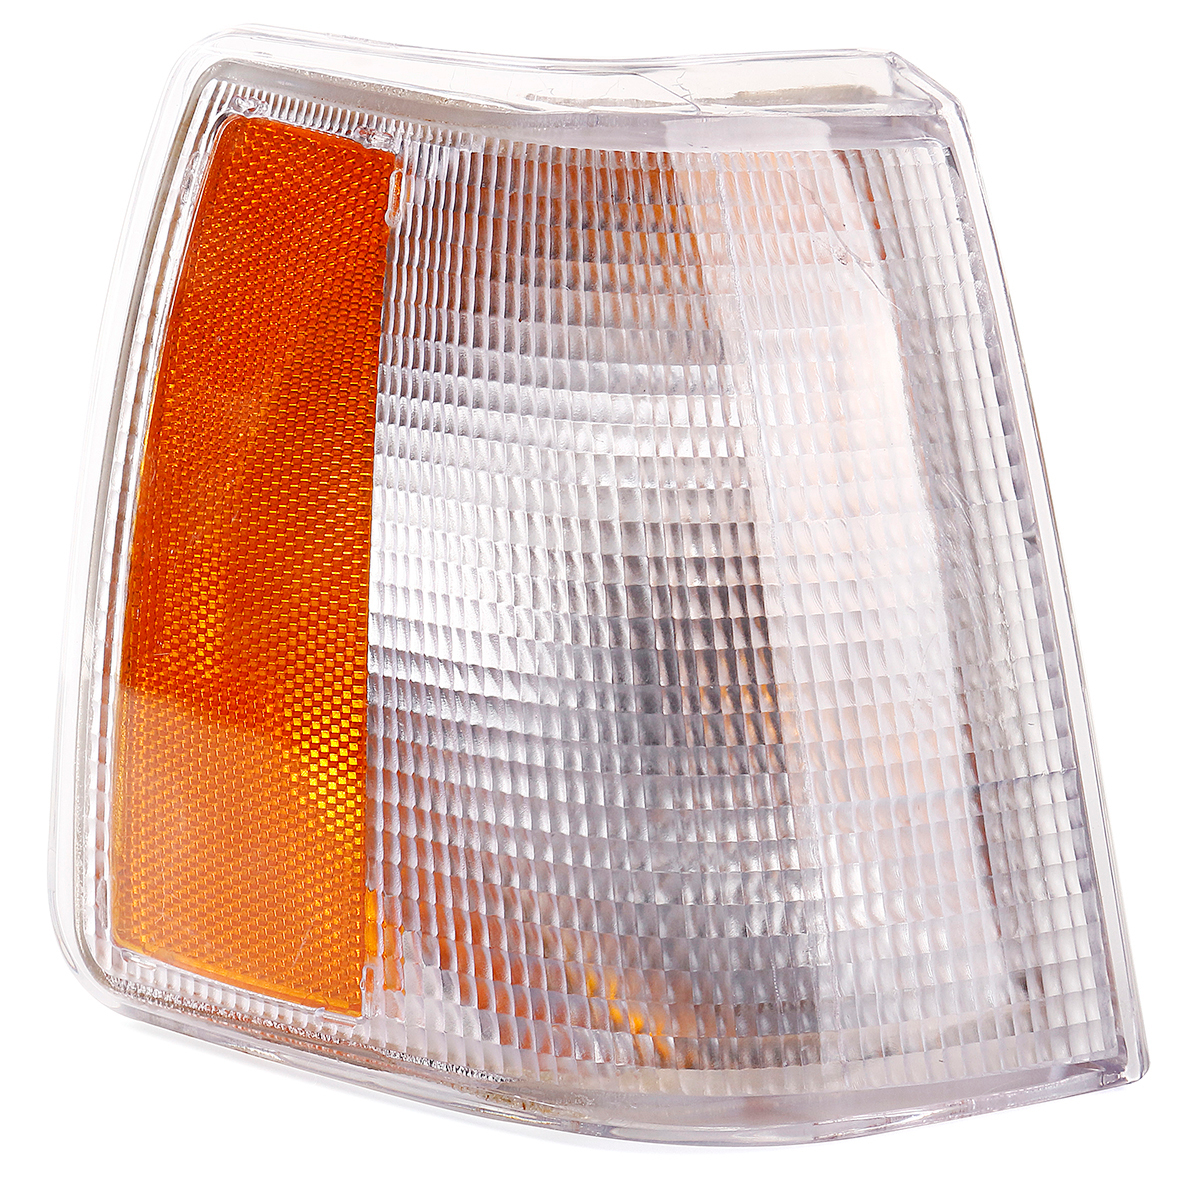 Side Parking Corner Light Cover Clear Lens Front Right for Volvo 740 940 960